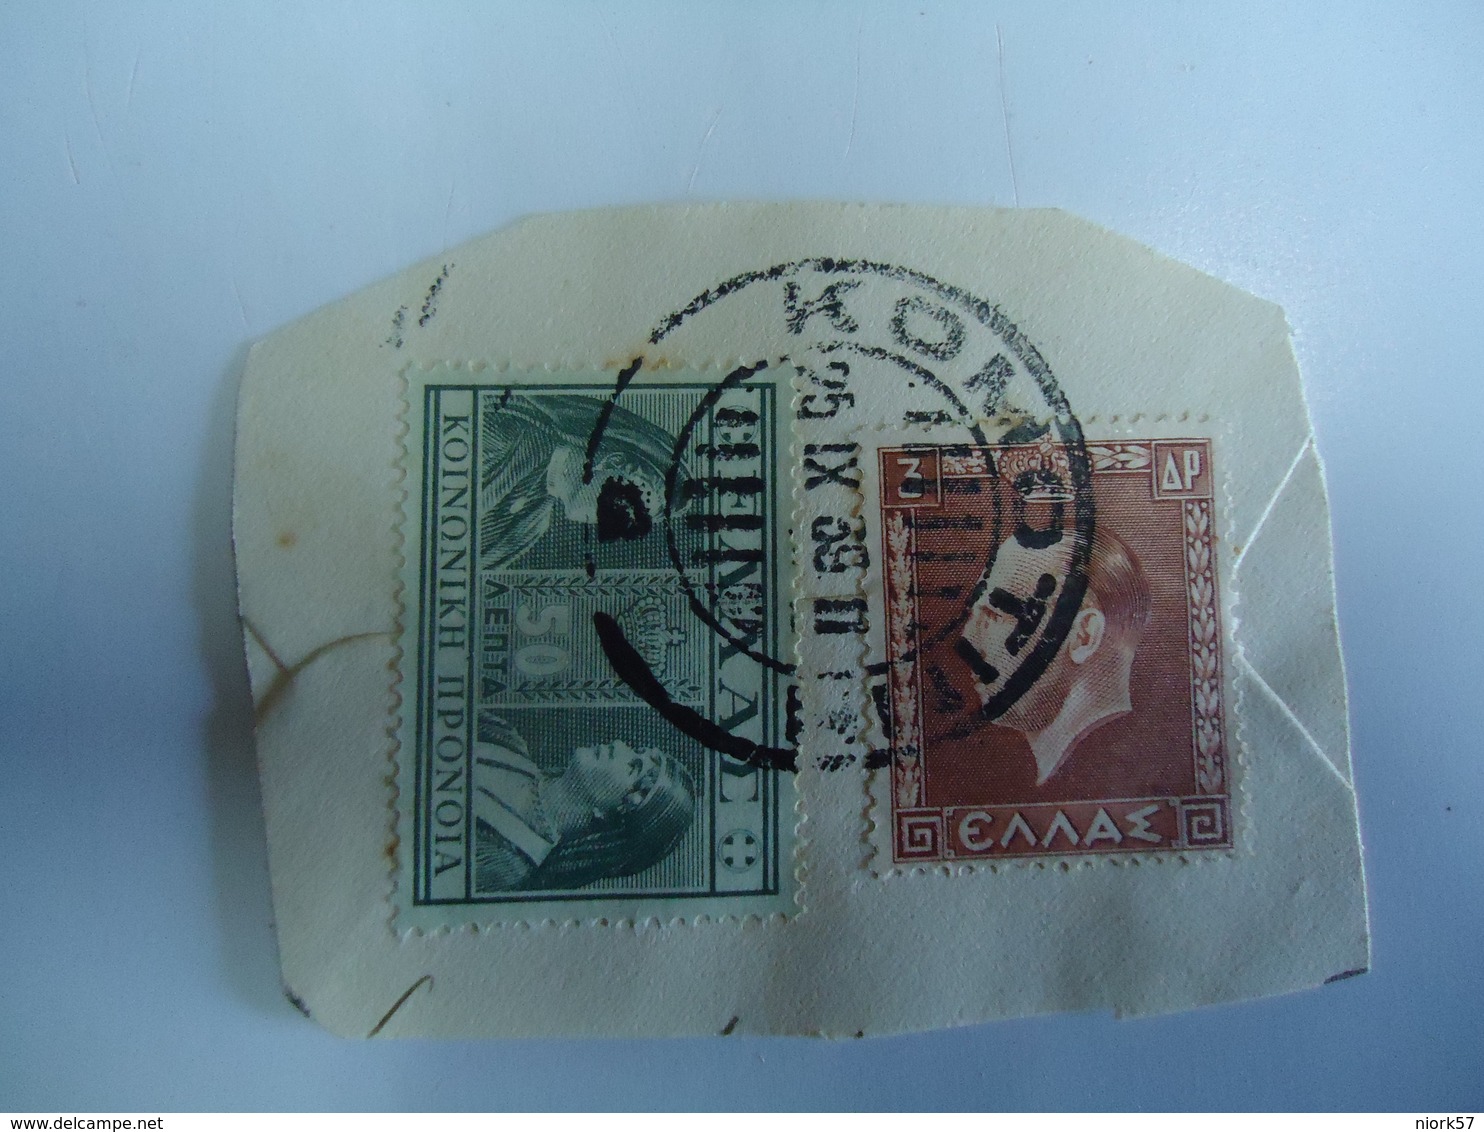 GREECE POSTMARKS ON PAPER   STAMPS  ΚΟΜΟΤΙΝΗ - Affrancature Meccaniche Rosse (EMA)